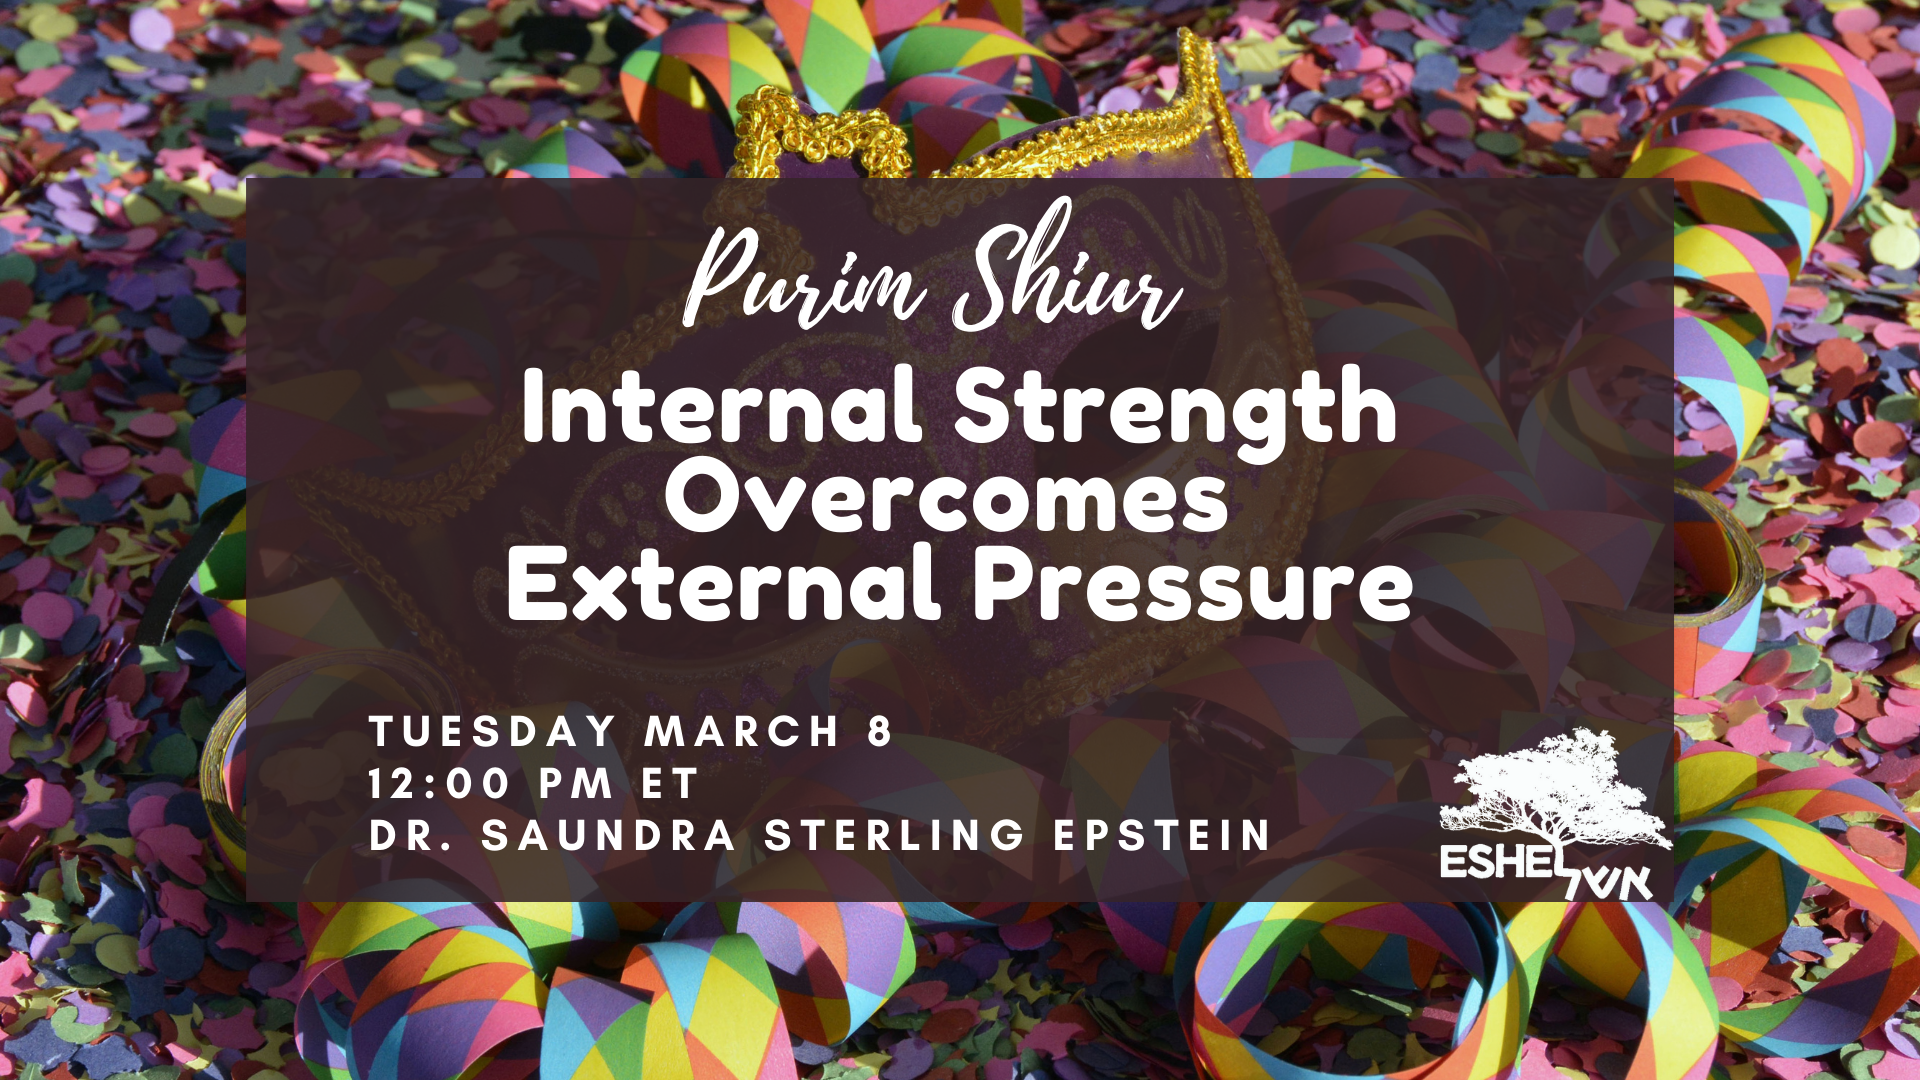 Purim Shiur | Internal Strength Overcomes External Pressure | Tuesday March 8 12:00 pm ET Dr. Saundra Sterling Epstein